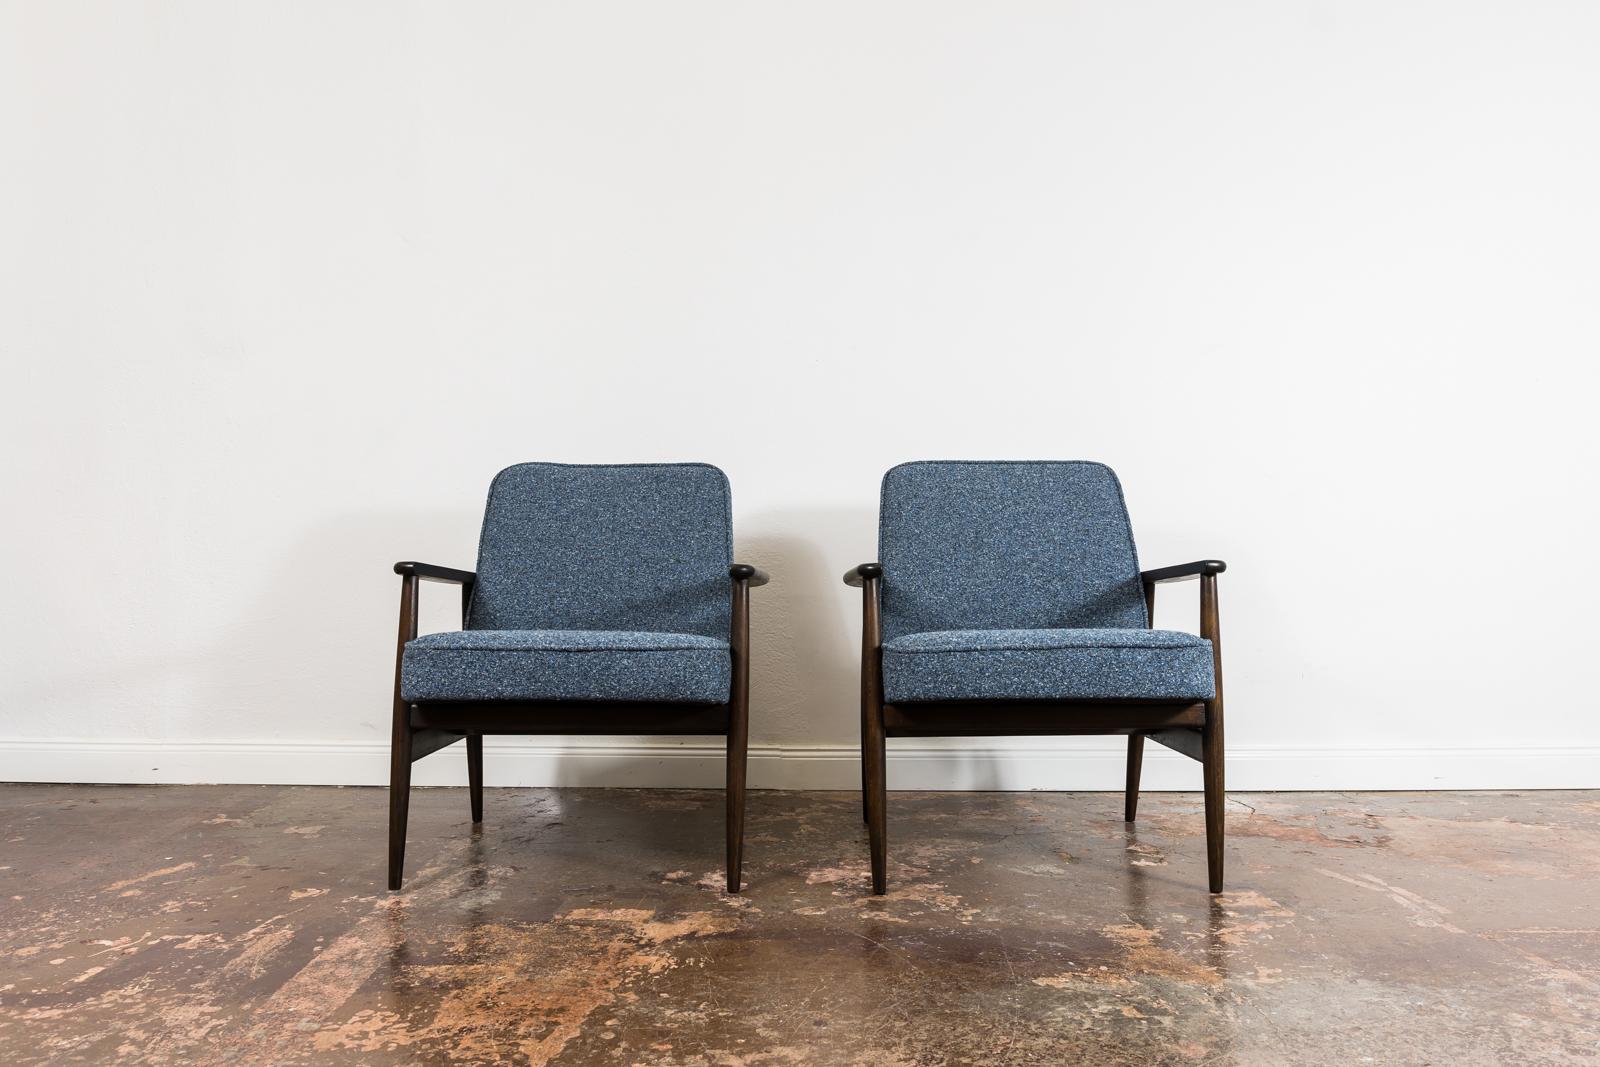 Pair of Mid-Century Blue Armchairs GFM 300-192, 1960's Poland.
Completely restored.